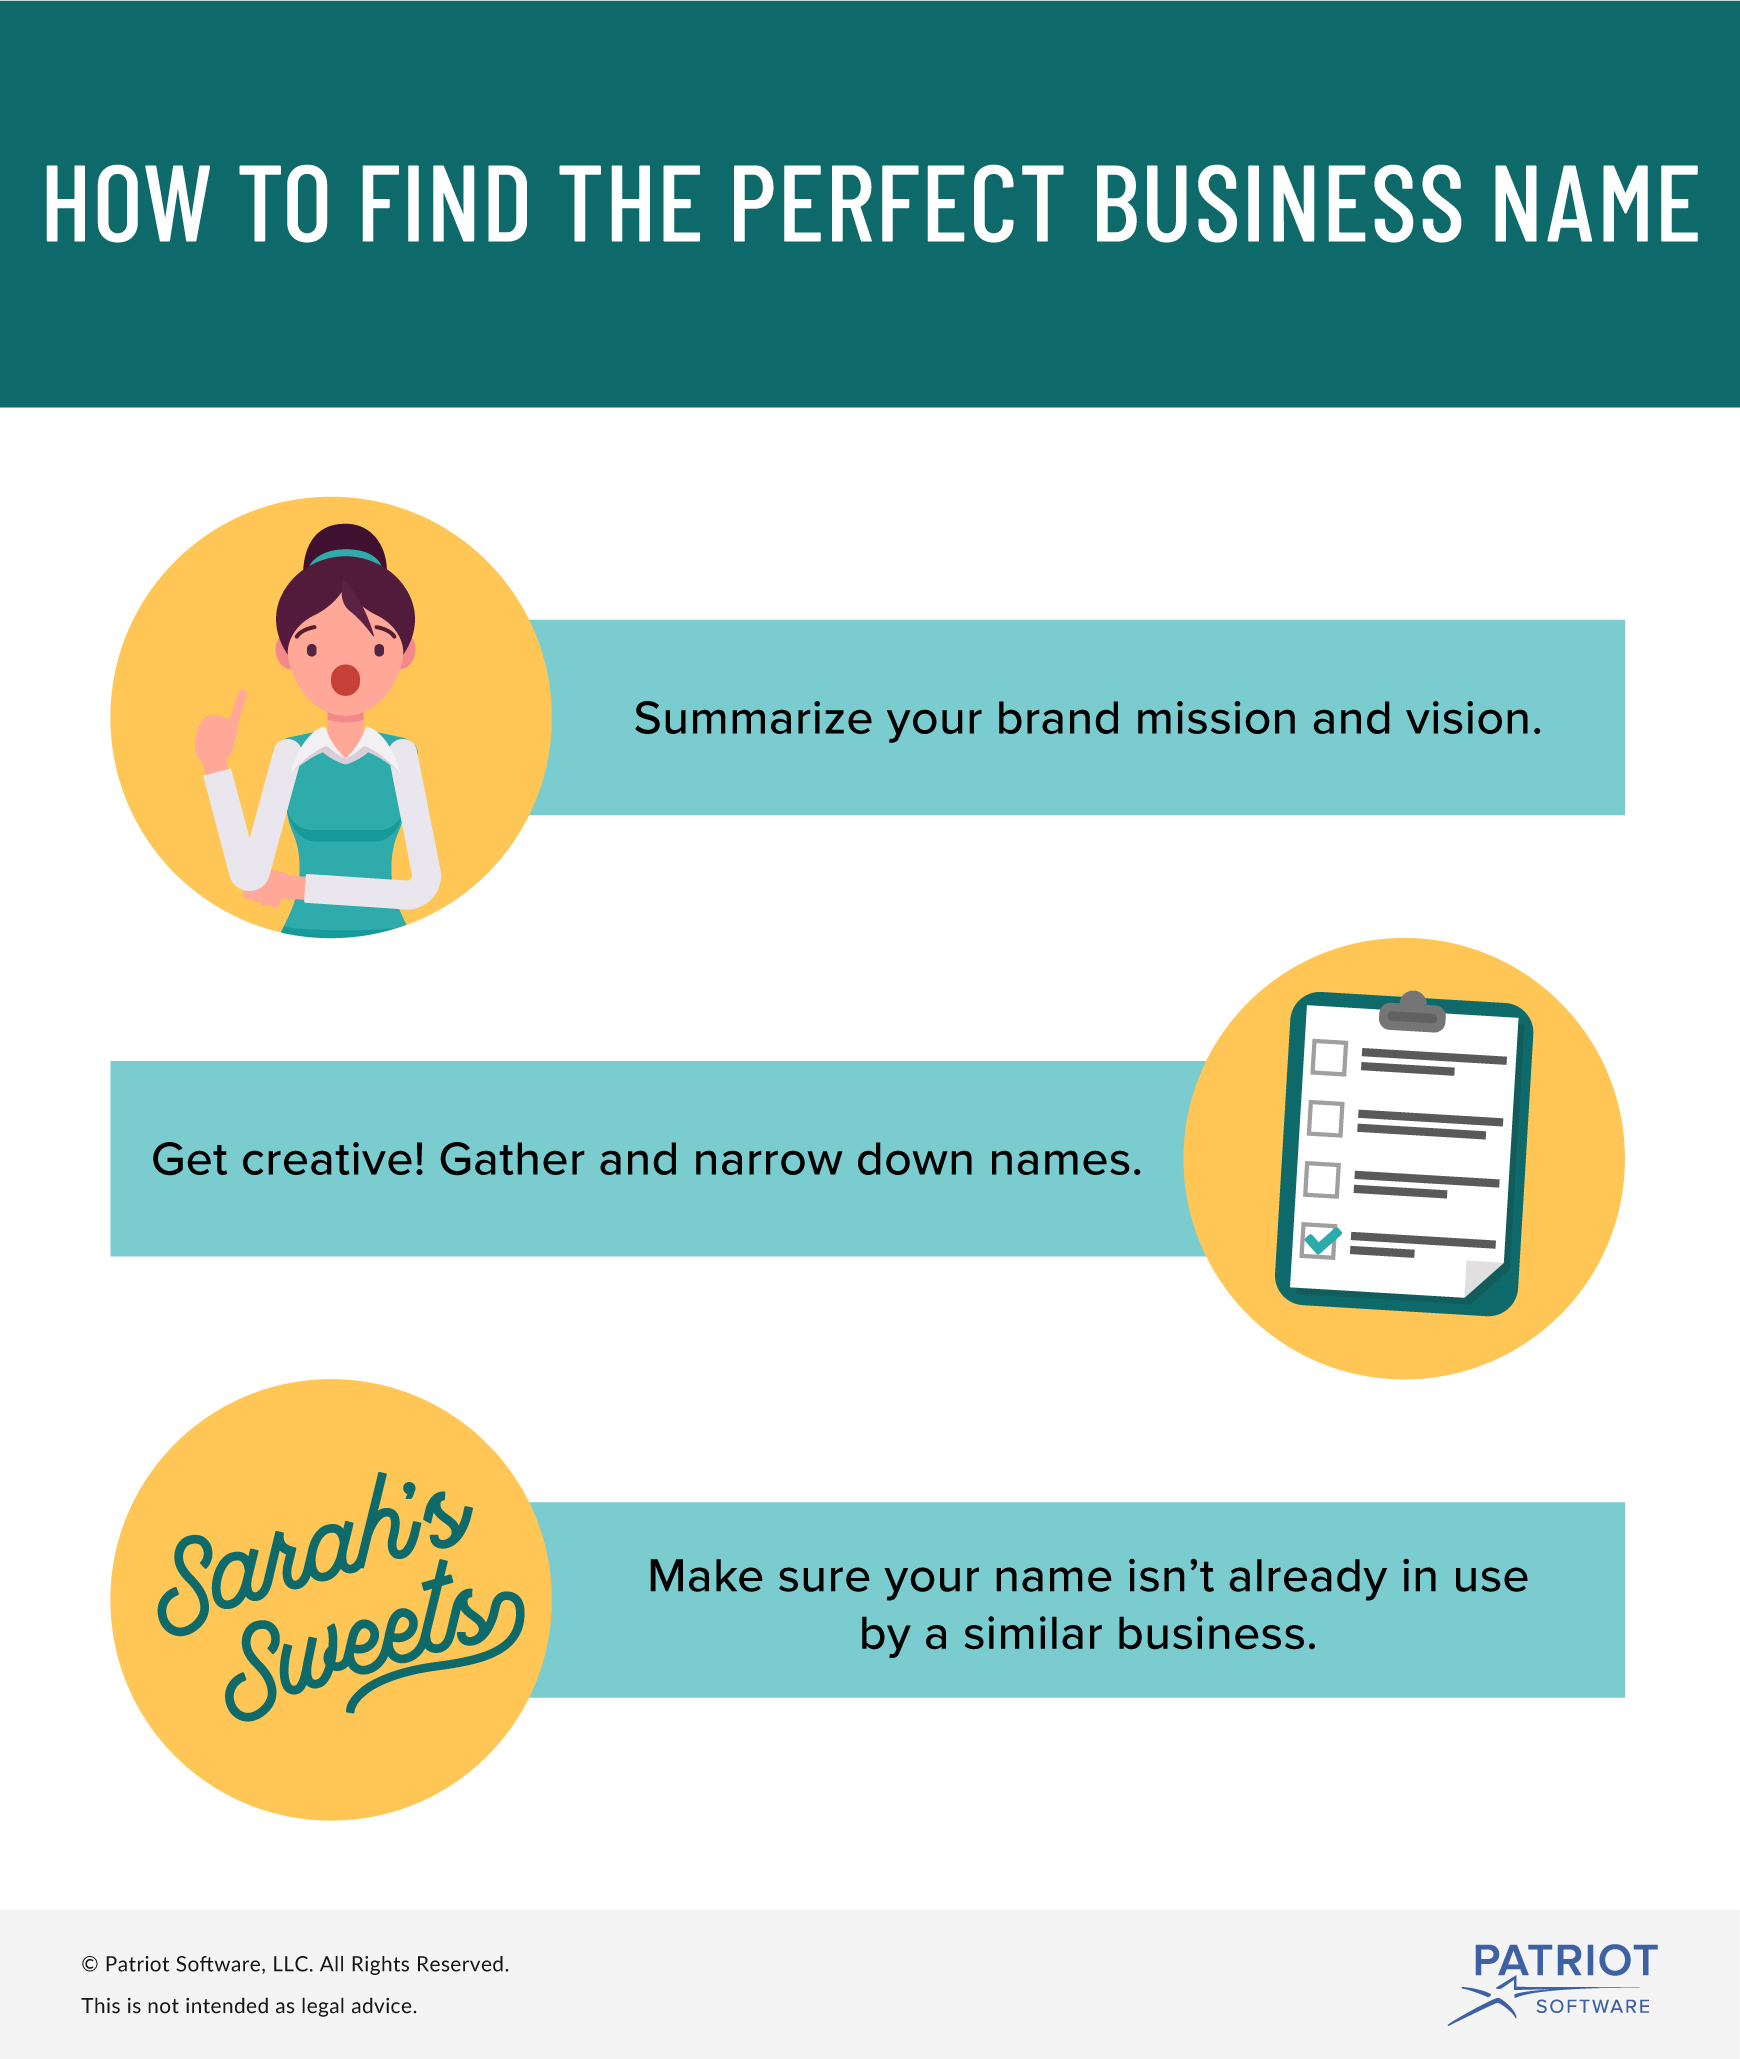 3 steps to finding the perfect business name